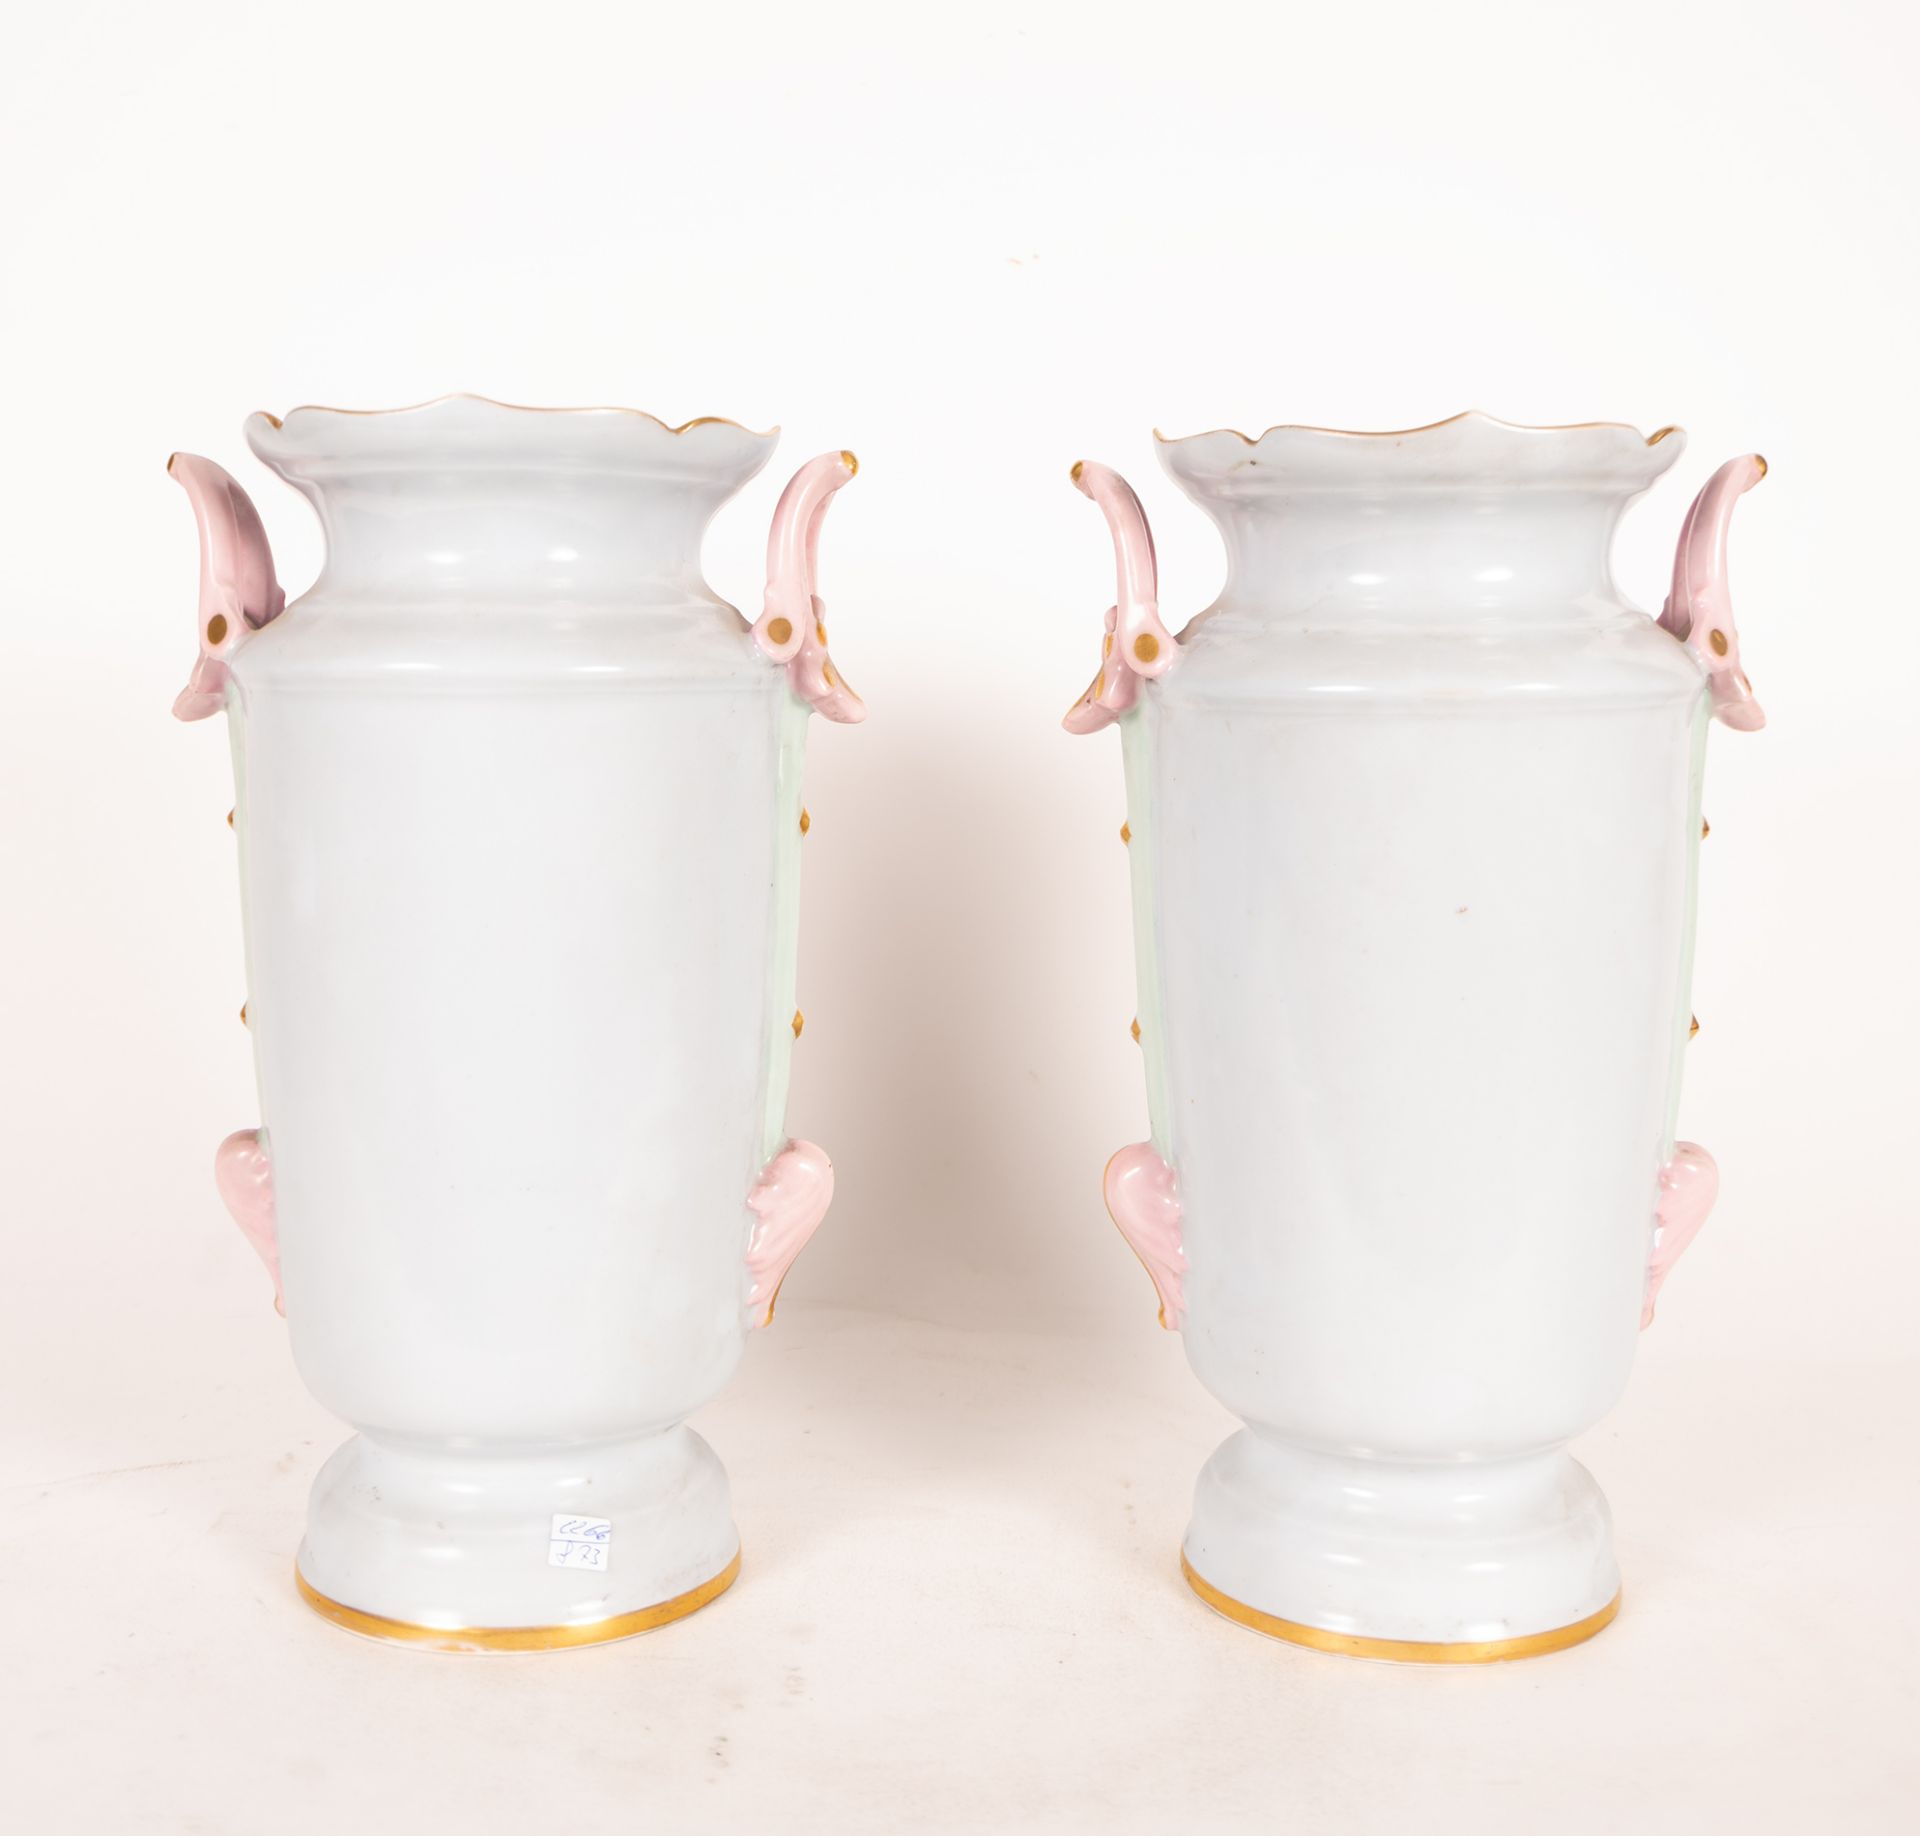 Pair of Viennese porcelain vases, late 19th century - Image 5 of 5